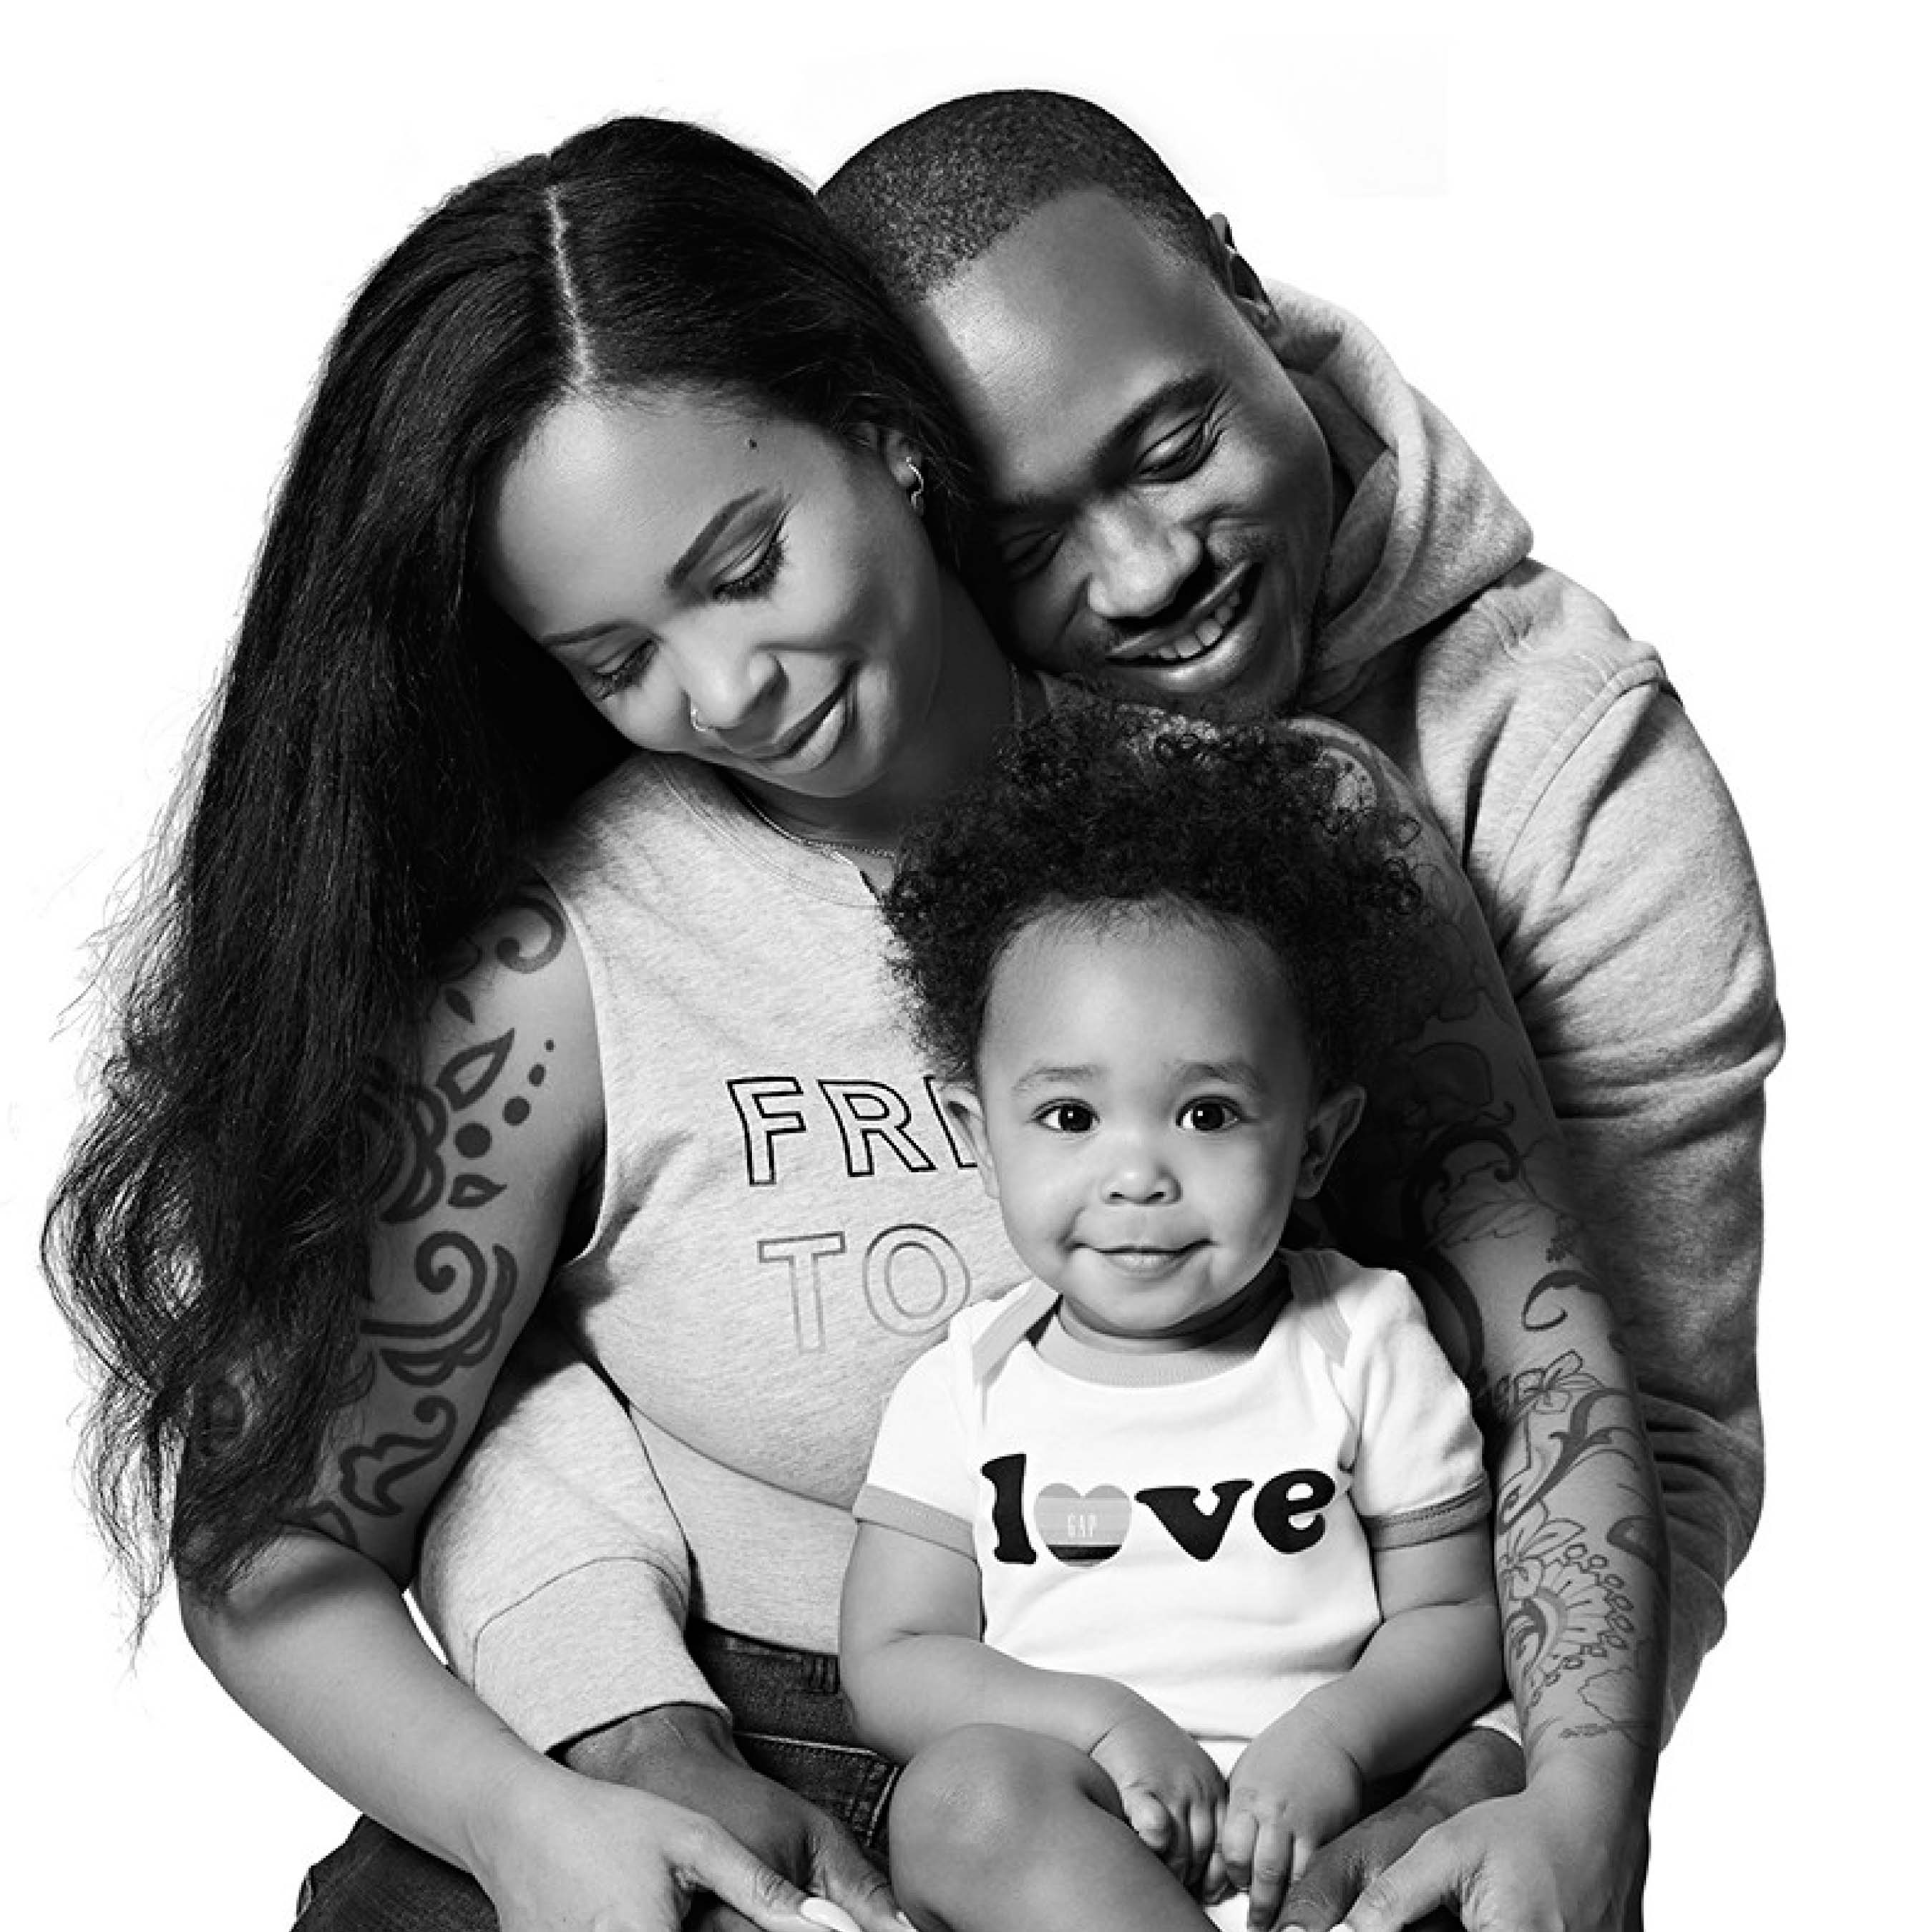 "We want to help create a world for our daughter that is hopeful, open, reflective, and shapeshifting love -- with new languages and communities of love." - wife, mother, educator, artist, and LGBTI advocate @kimkatrinmilan featured with her transgender husband @themrmilan and their daughter Soleil.